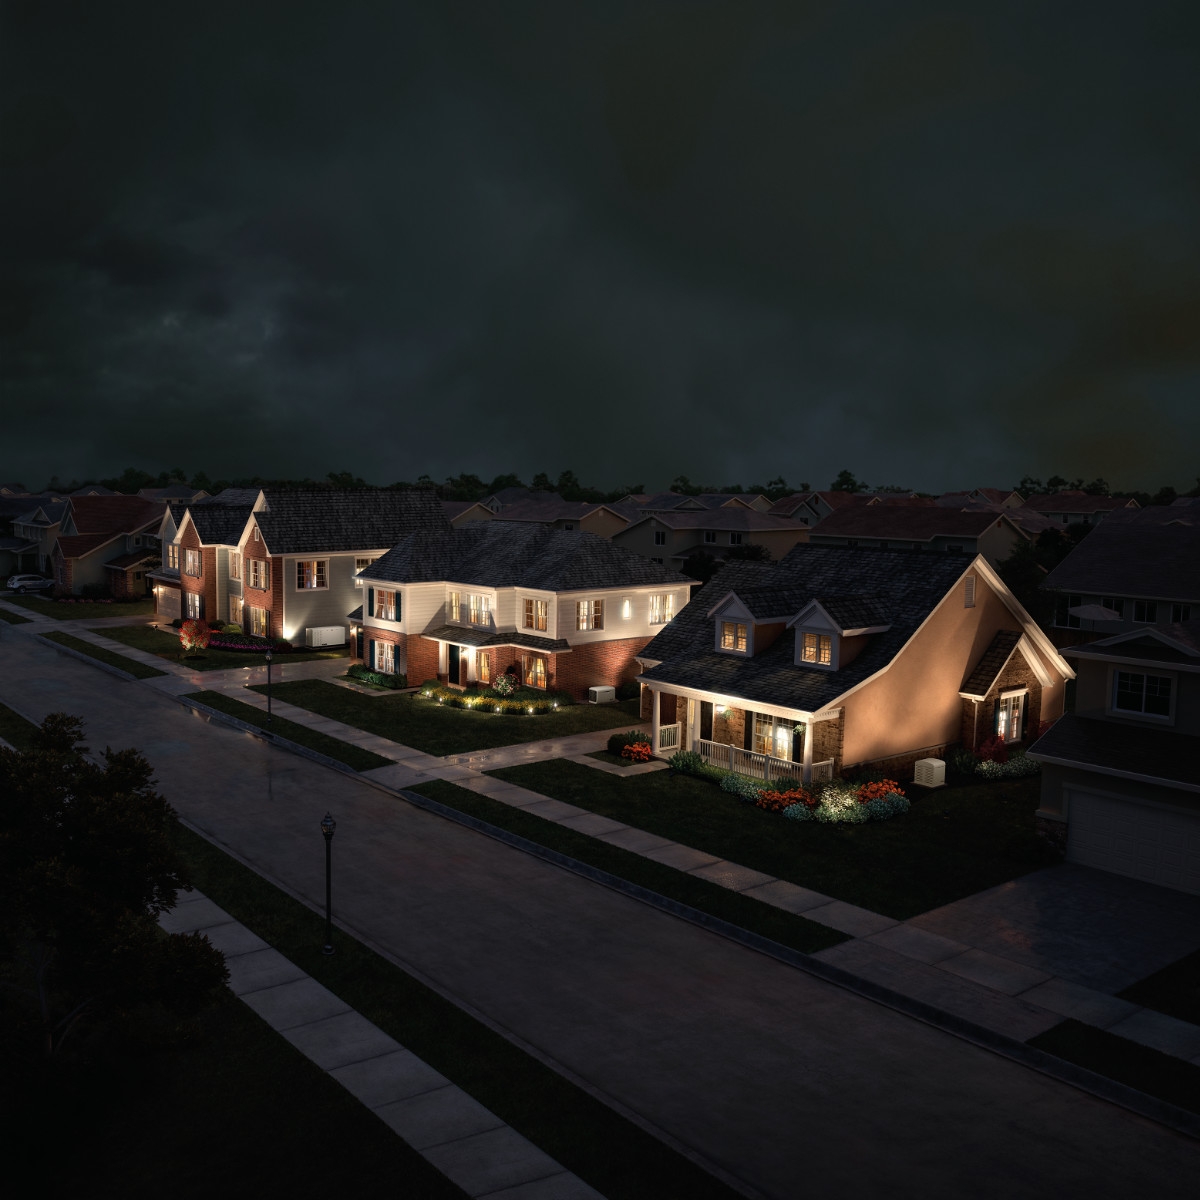 Three houses on a suburban street at night, all illuminated while the rest of the neighborhood is dark.
DAM # aab96179
[Card Article [7] 1:1]